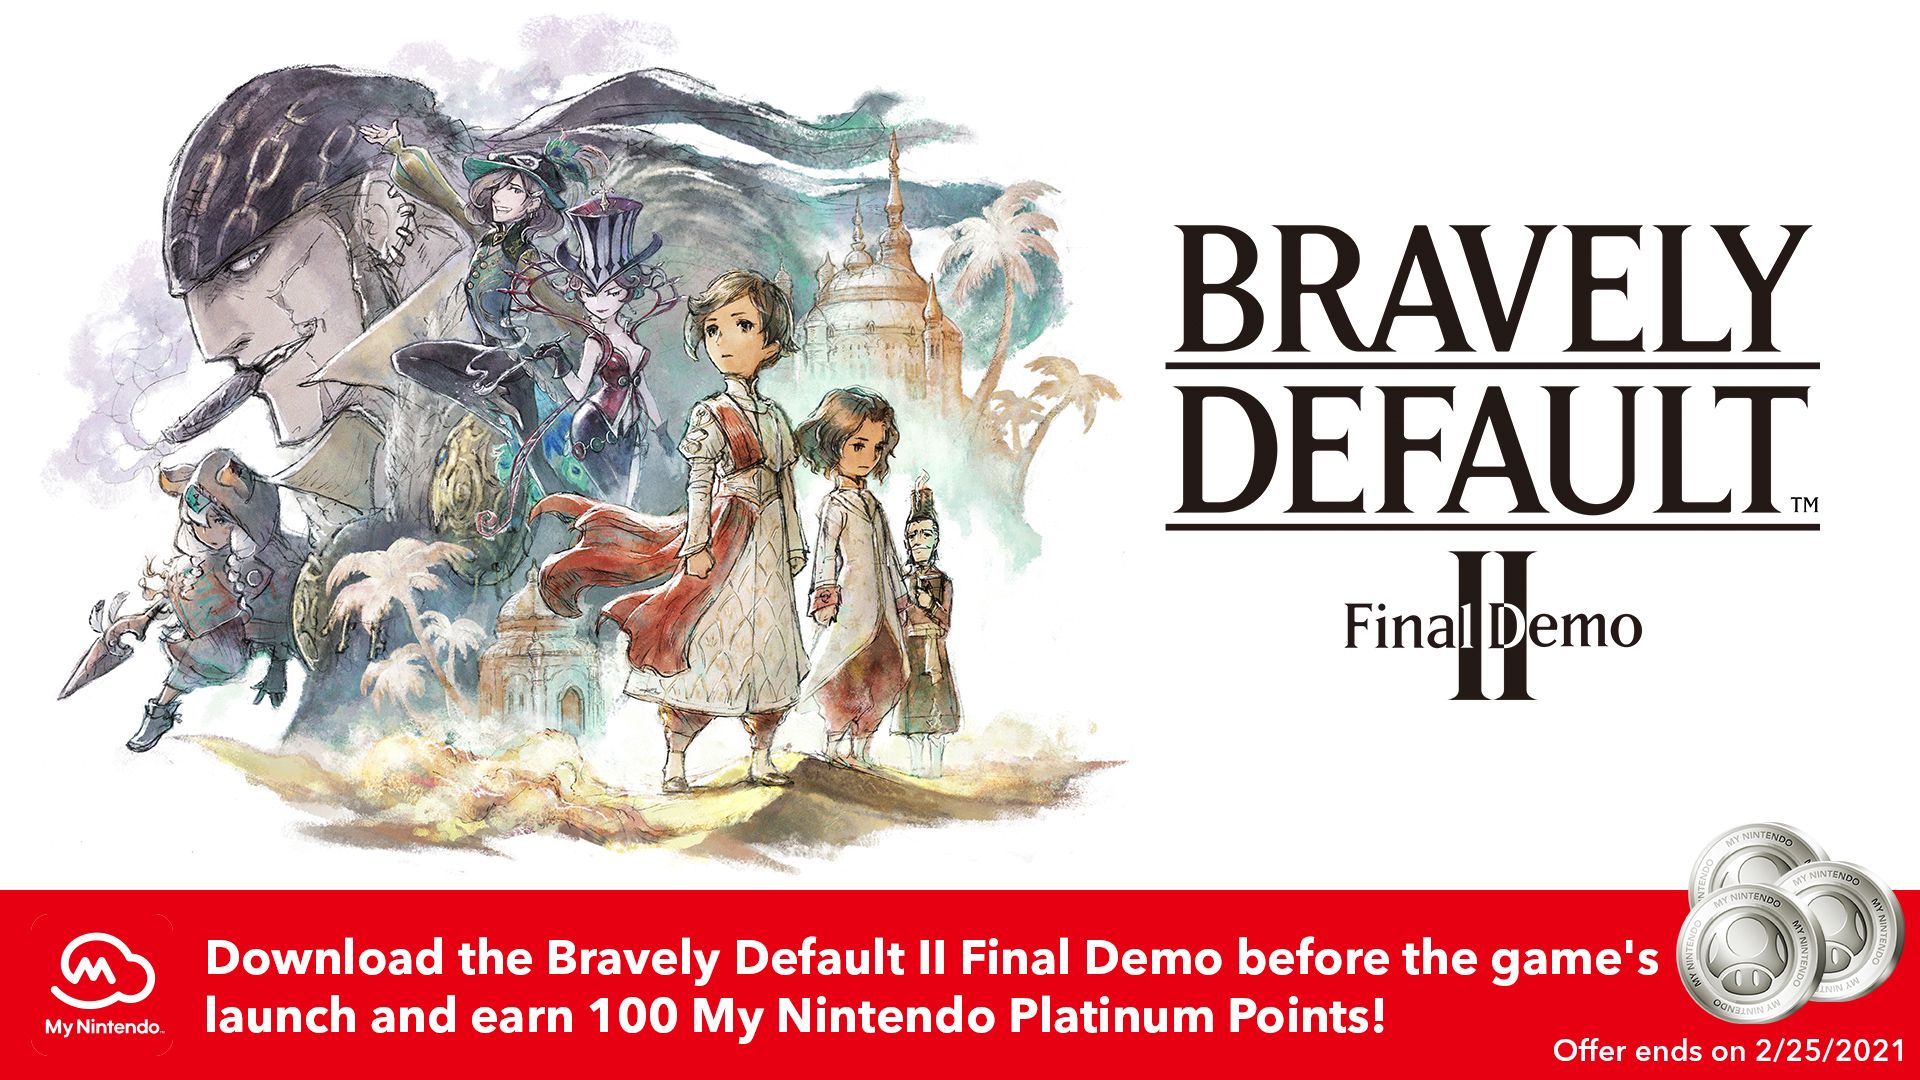 Bravely Default II Final Demo Now Available to Download